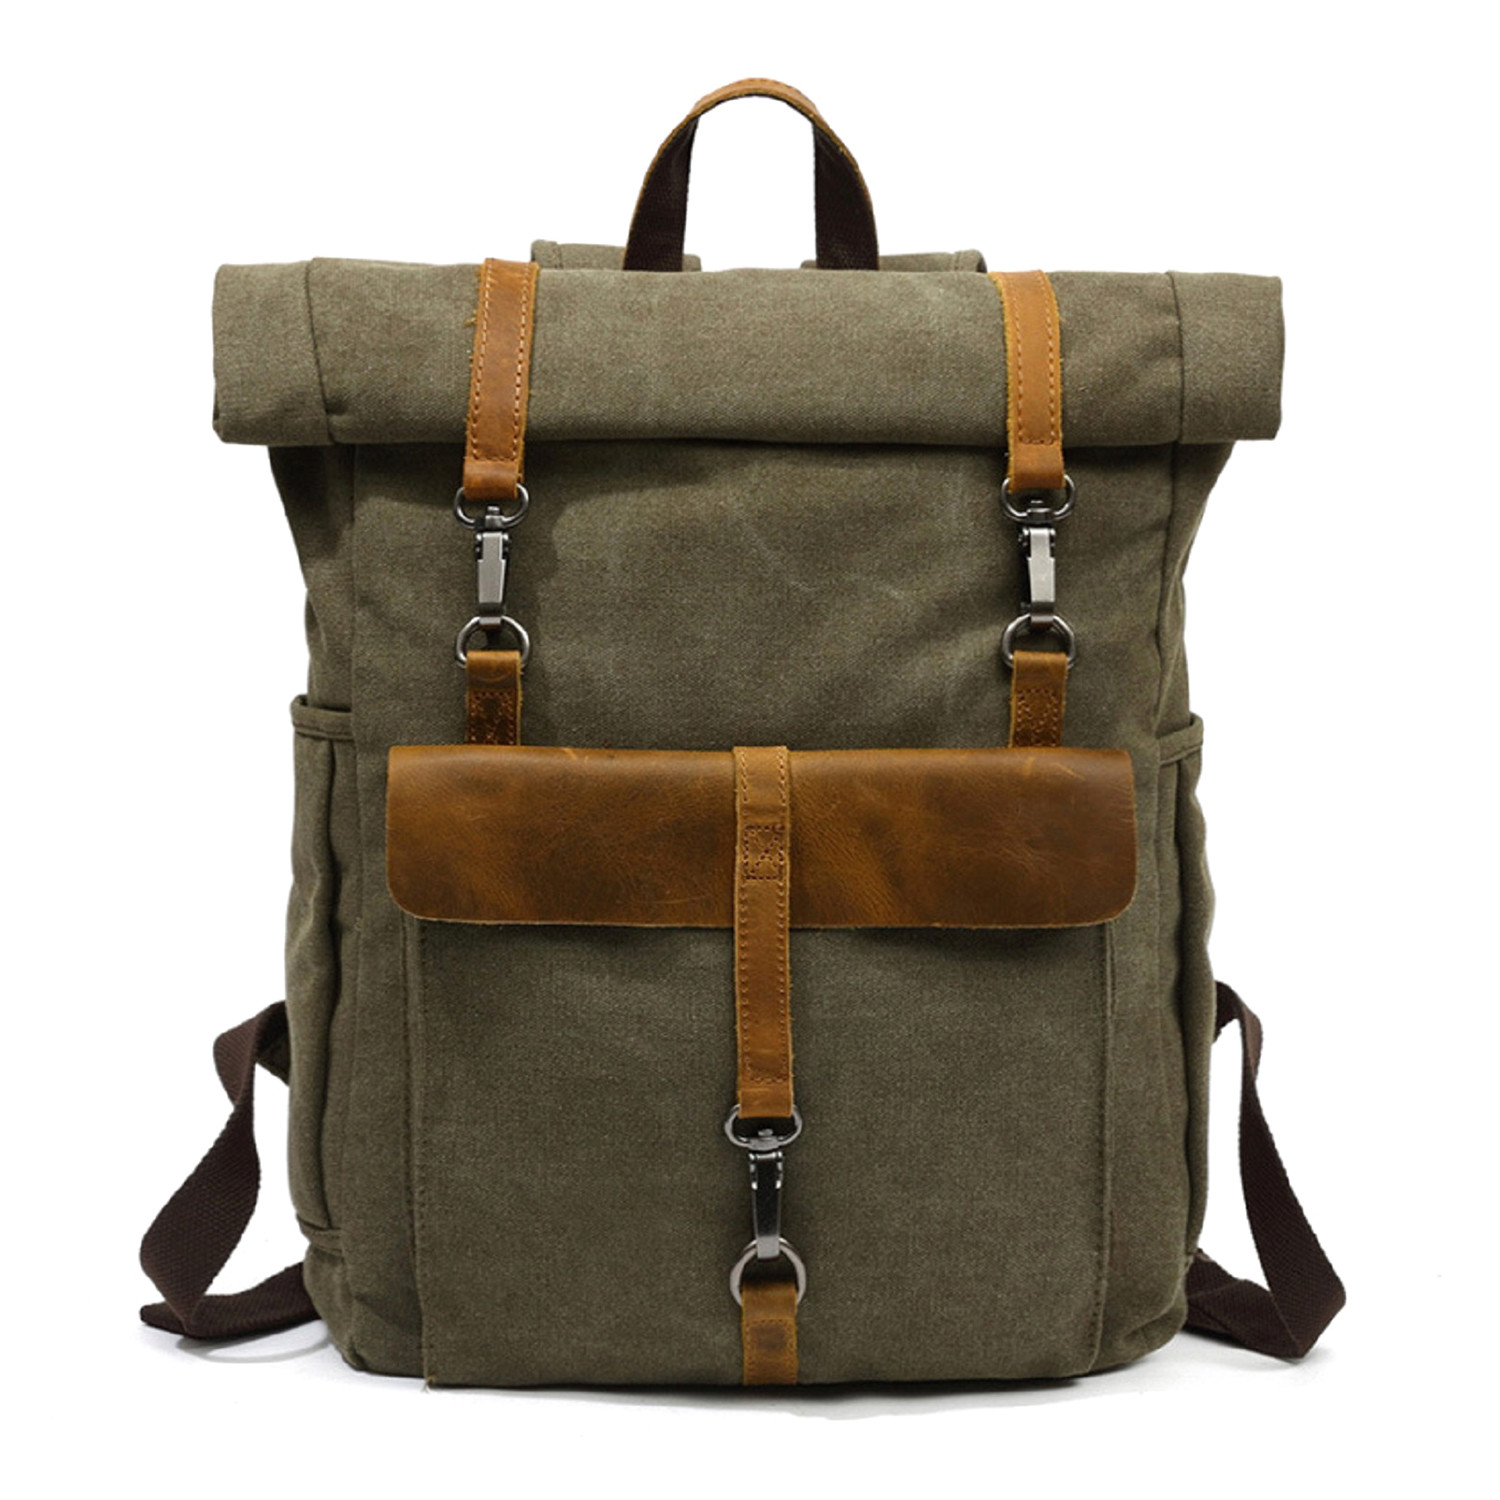 Triple Buckle Backpack // Army Green - OwnBag - Touch of Modern